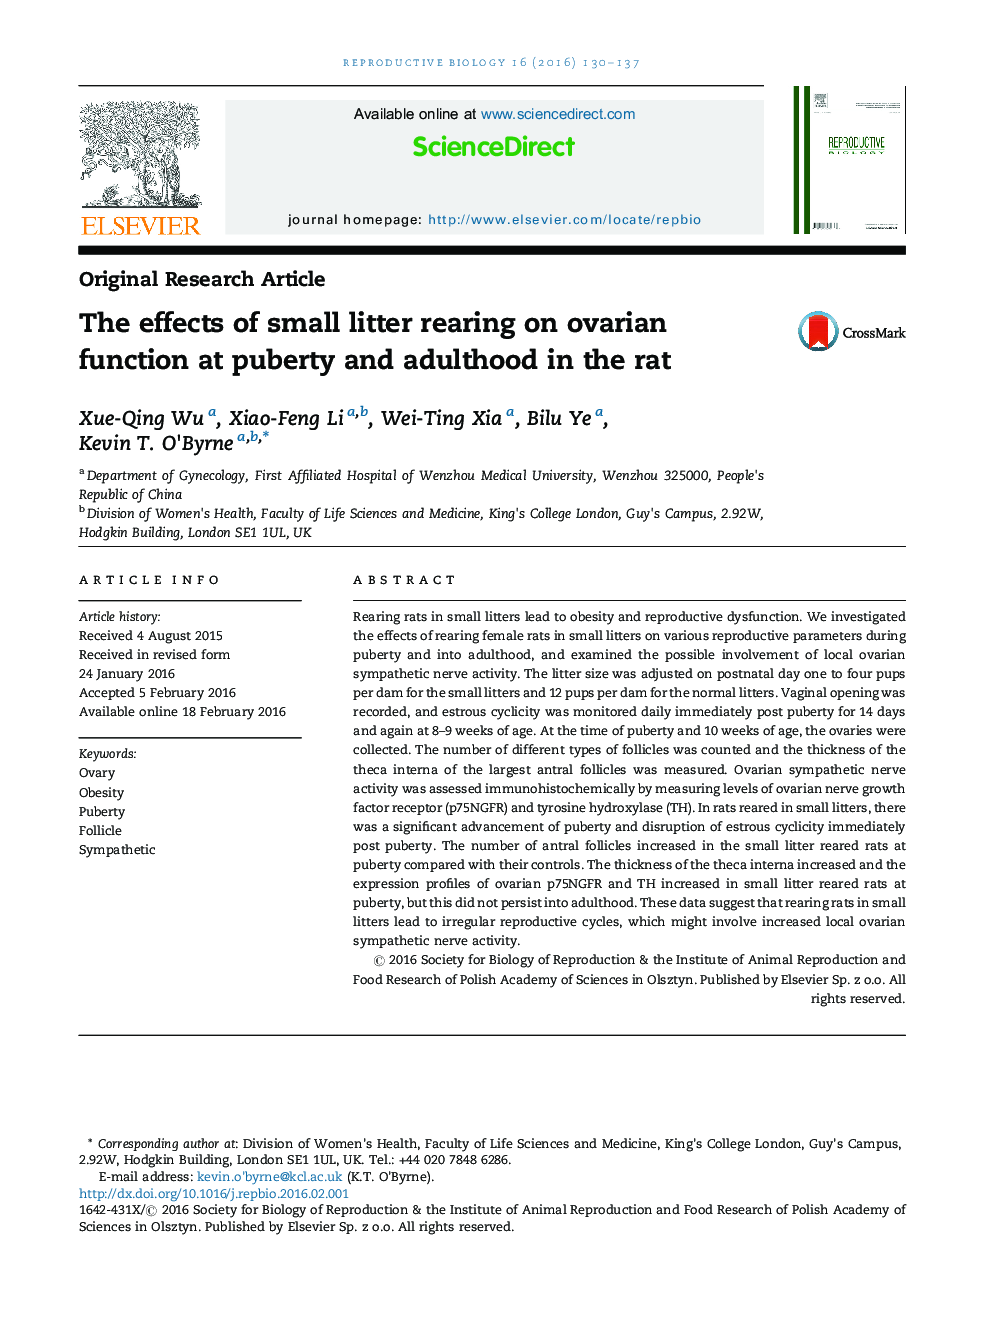 The effects of small litter rearing on ovarian function at puberty and adulthood in the rat